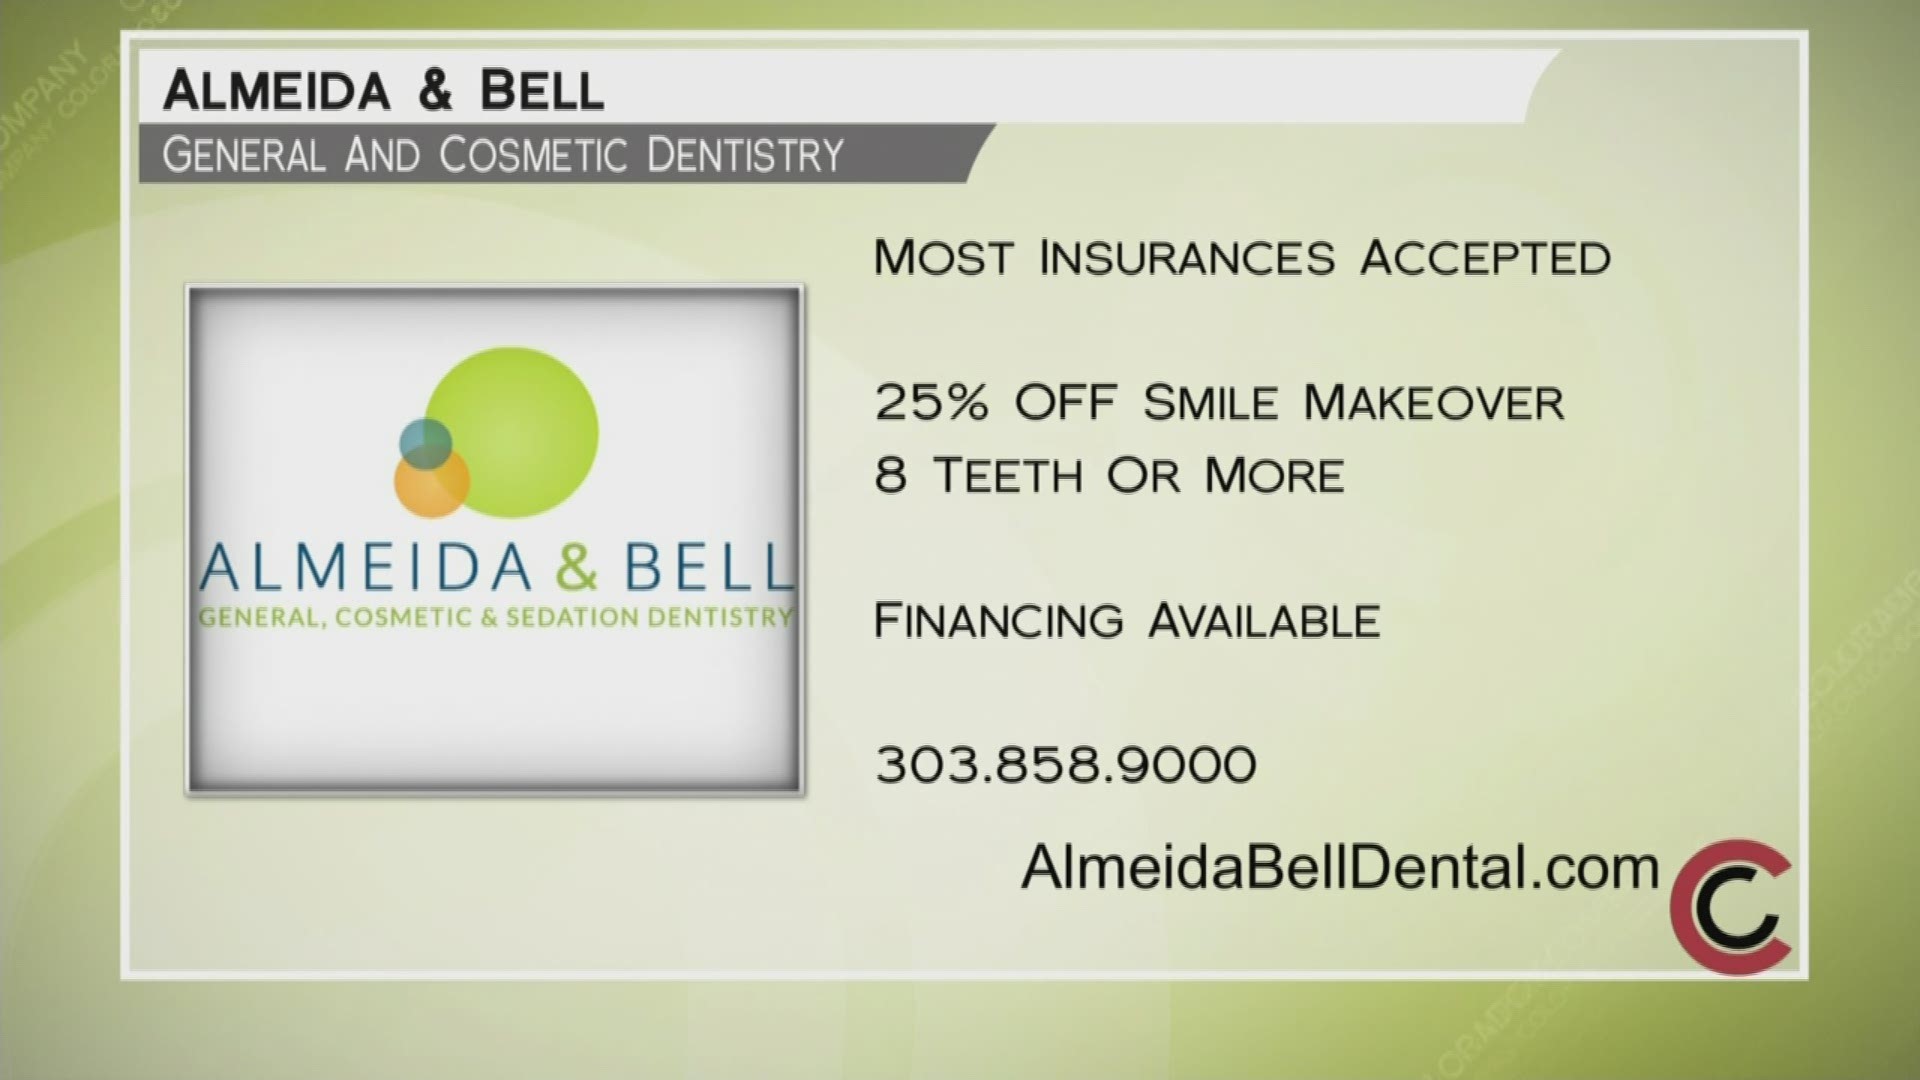 Get 25% off a smile makeover of 8 teeth or more. Most insurances are accepted, and financing is available. Learn more at AlmeidaBellDental.com.